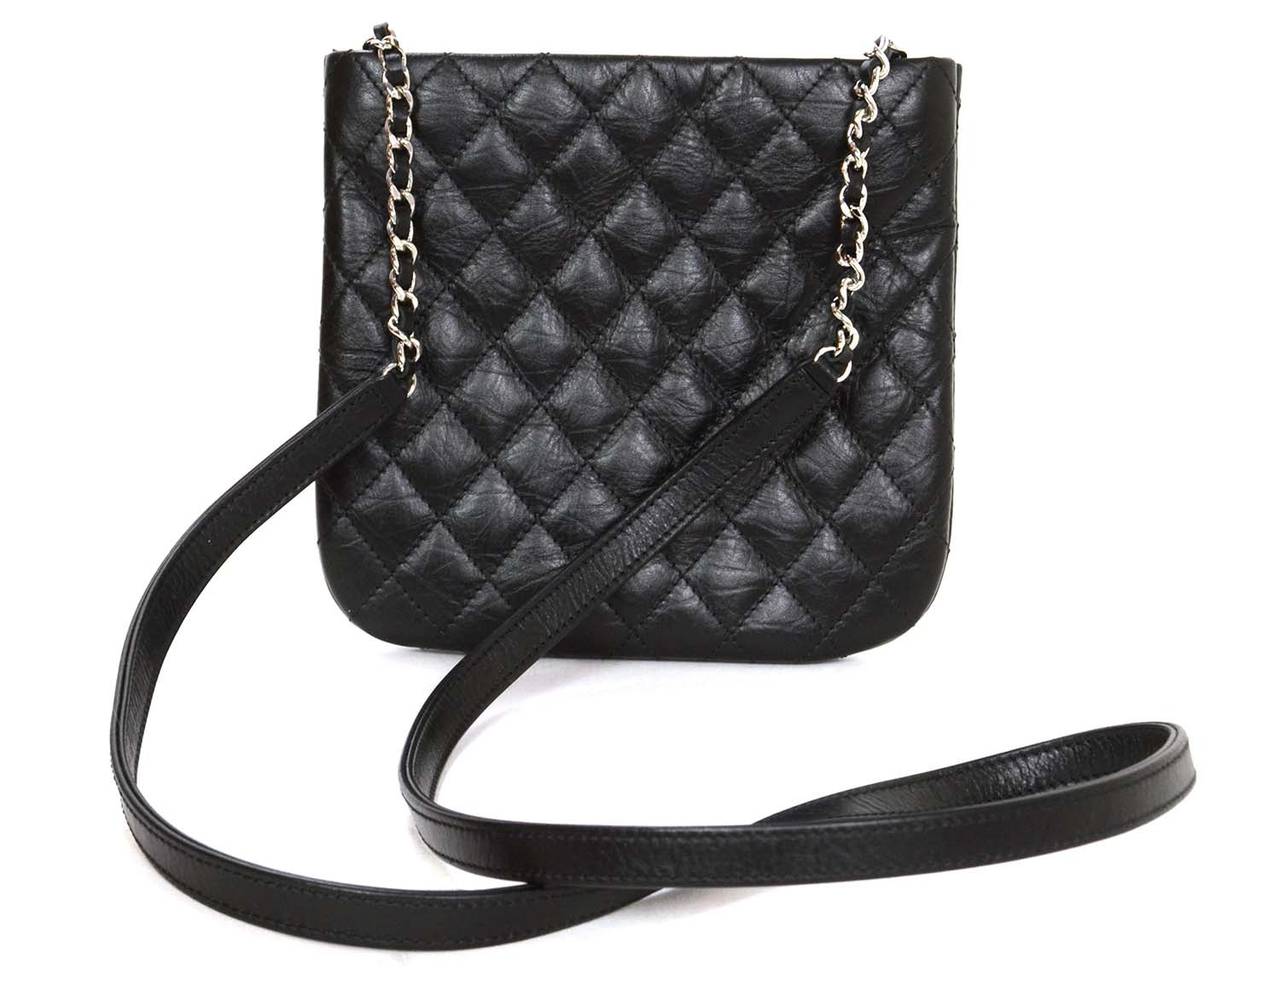 CHANEL Black Quilted Leather Crossbody Bag SHW at 1stdibs